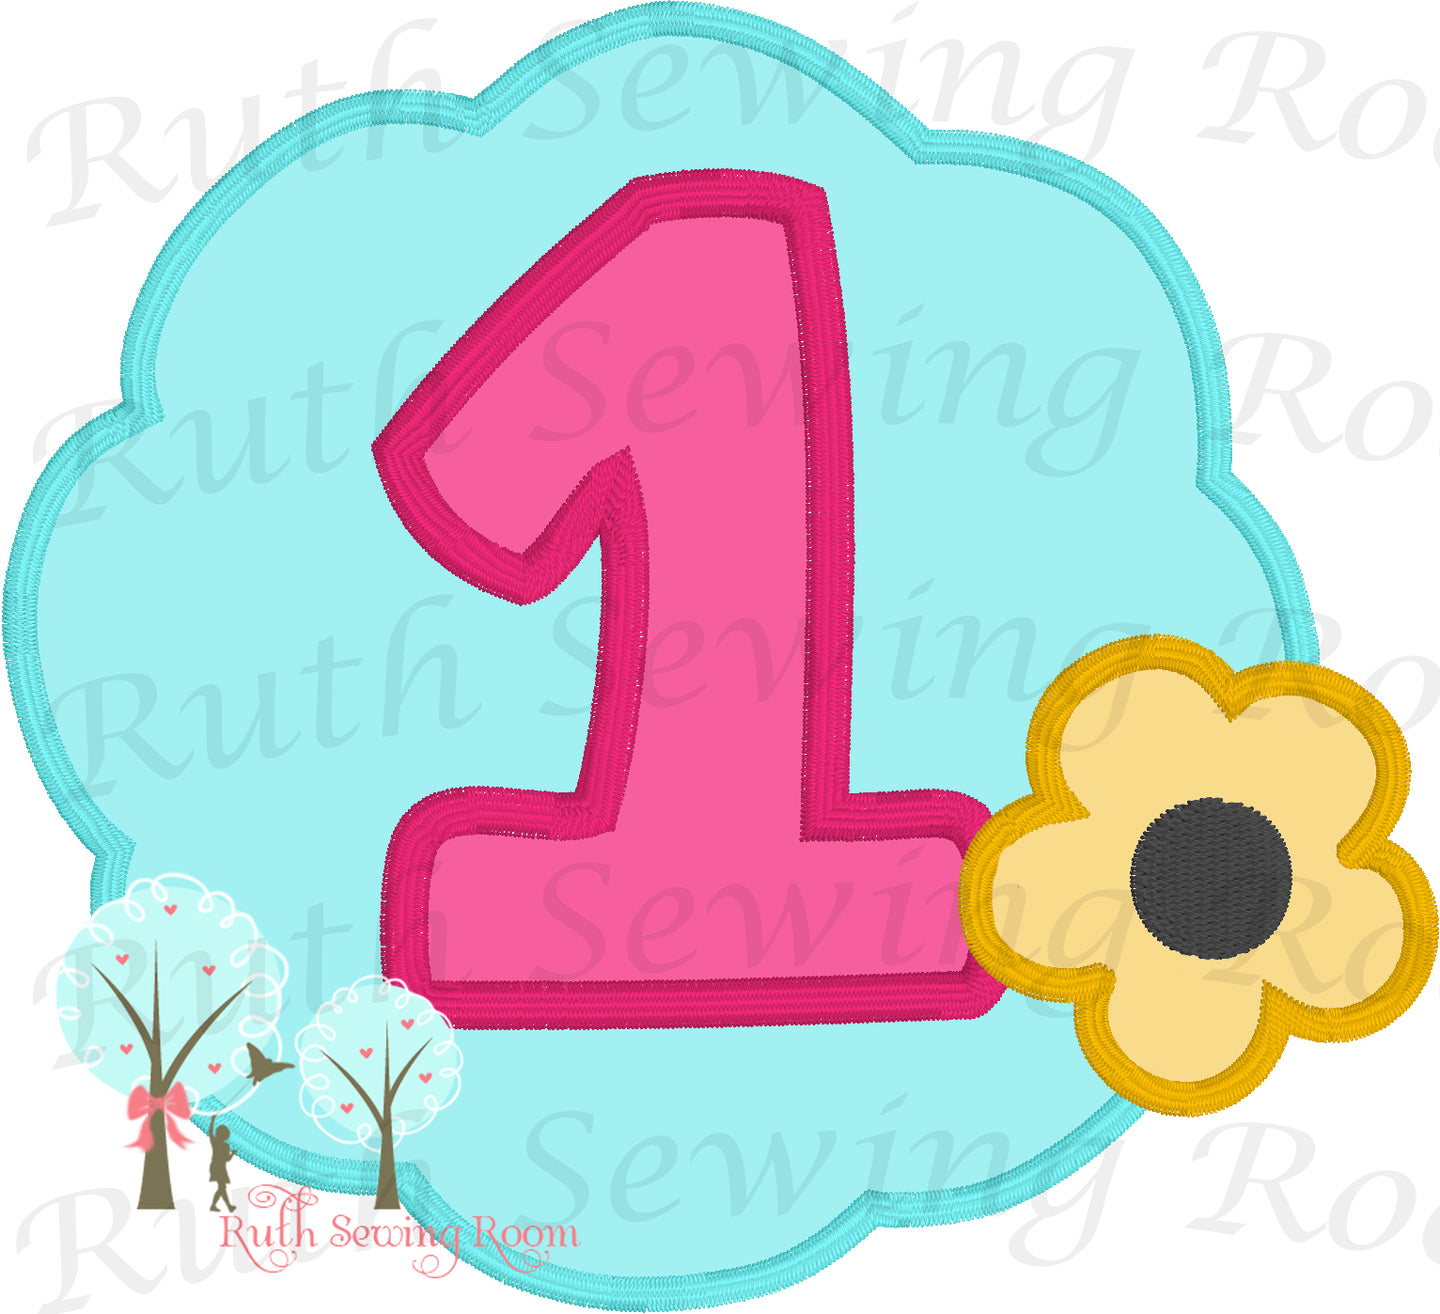 Frame Number 1 with Daisy Flower   - Monogram Daisy -- Appliques Embroidery Design -- Digitize File